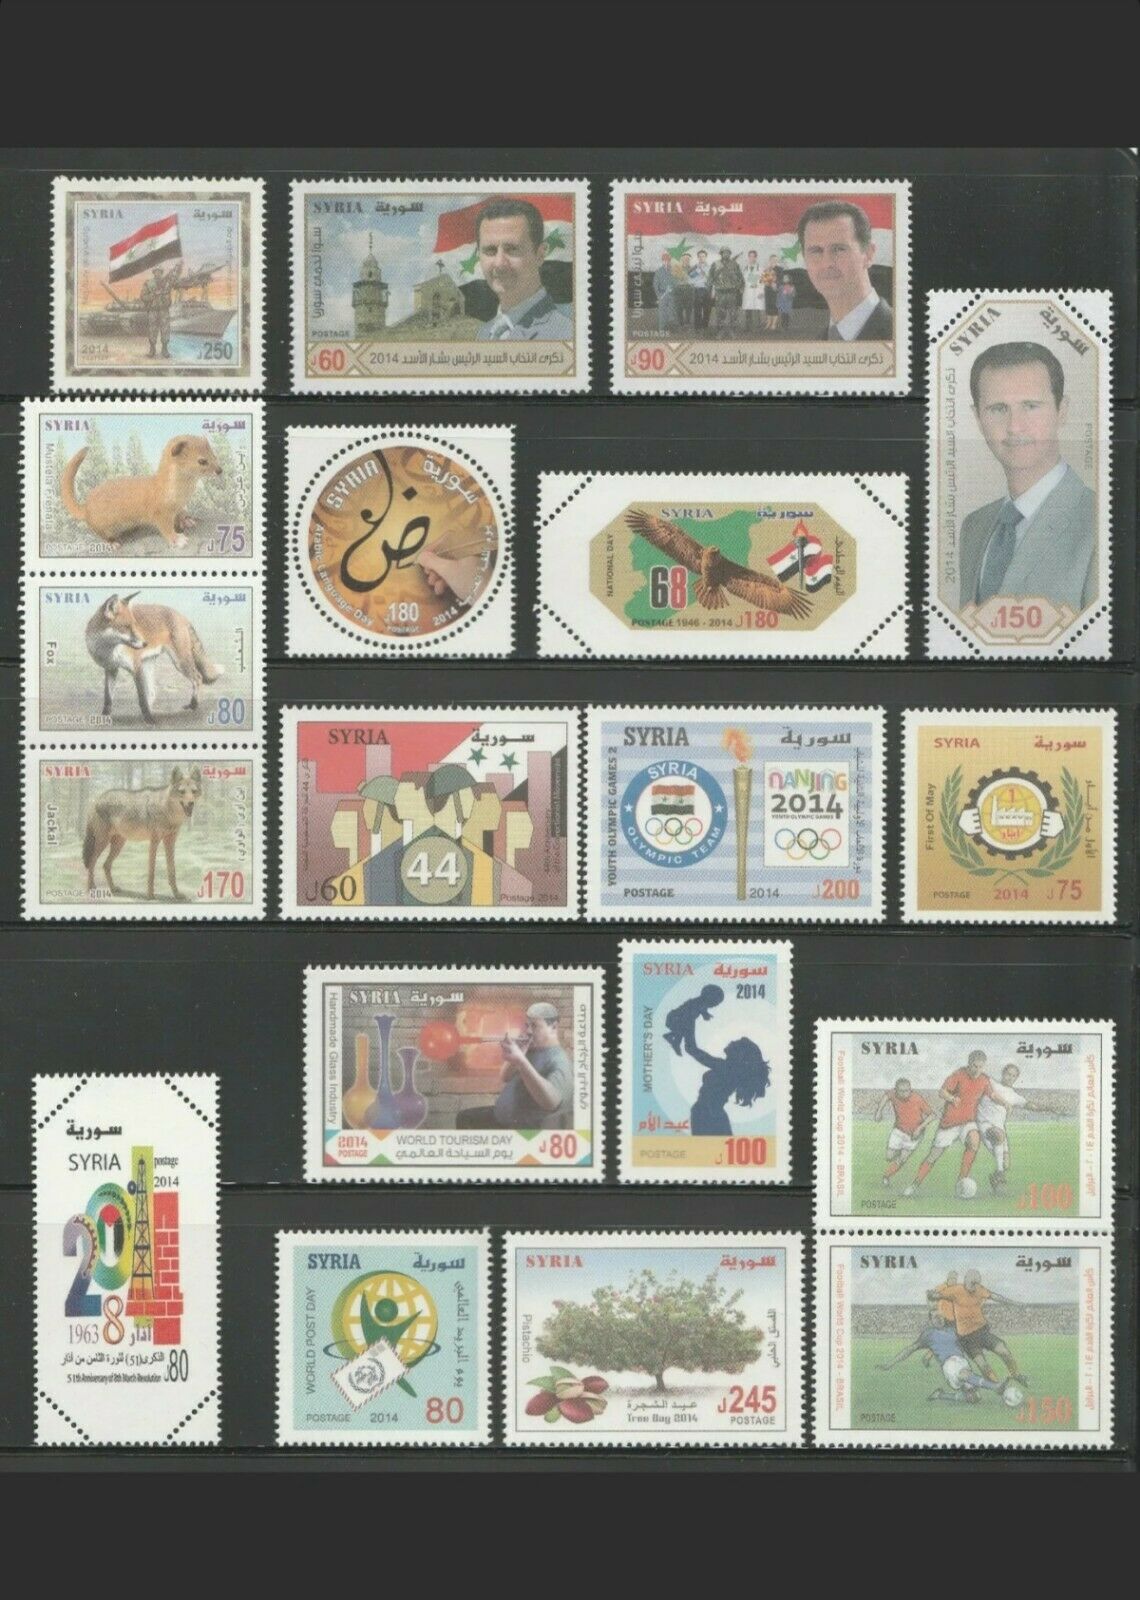 Syria, Complete Year Sets & M/S 2014 According To SG. Cat., MINT NEVER HINGED